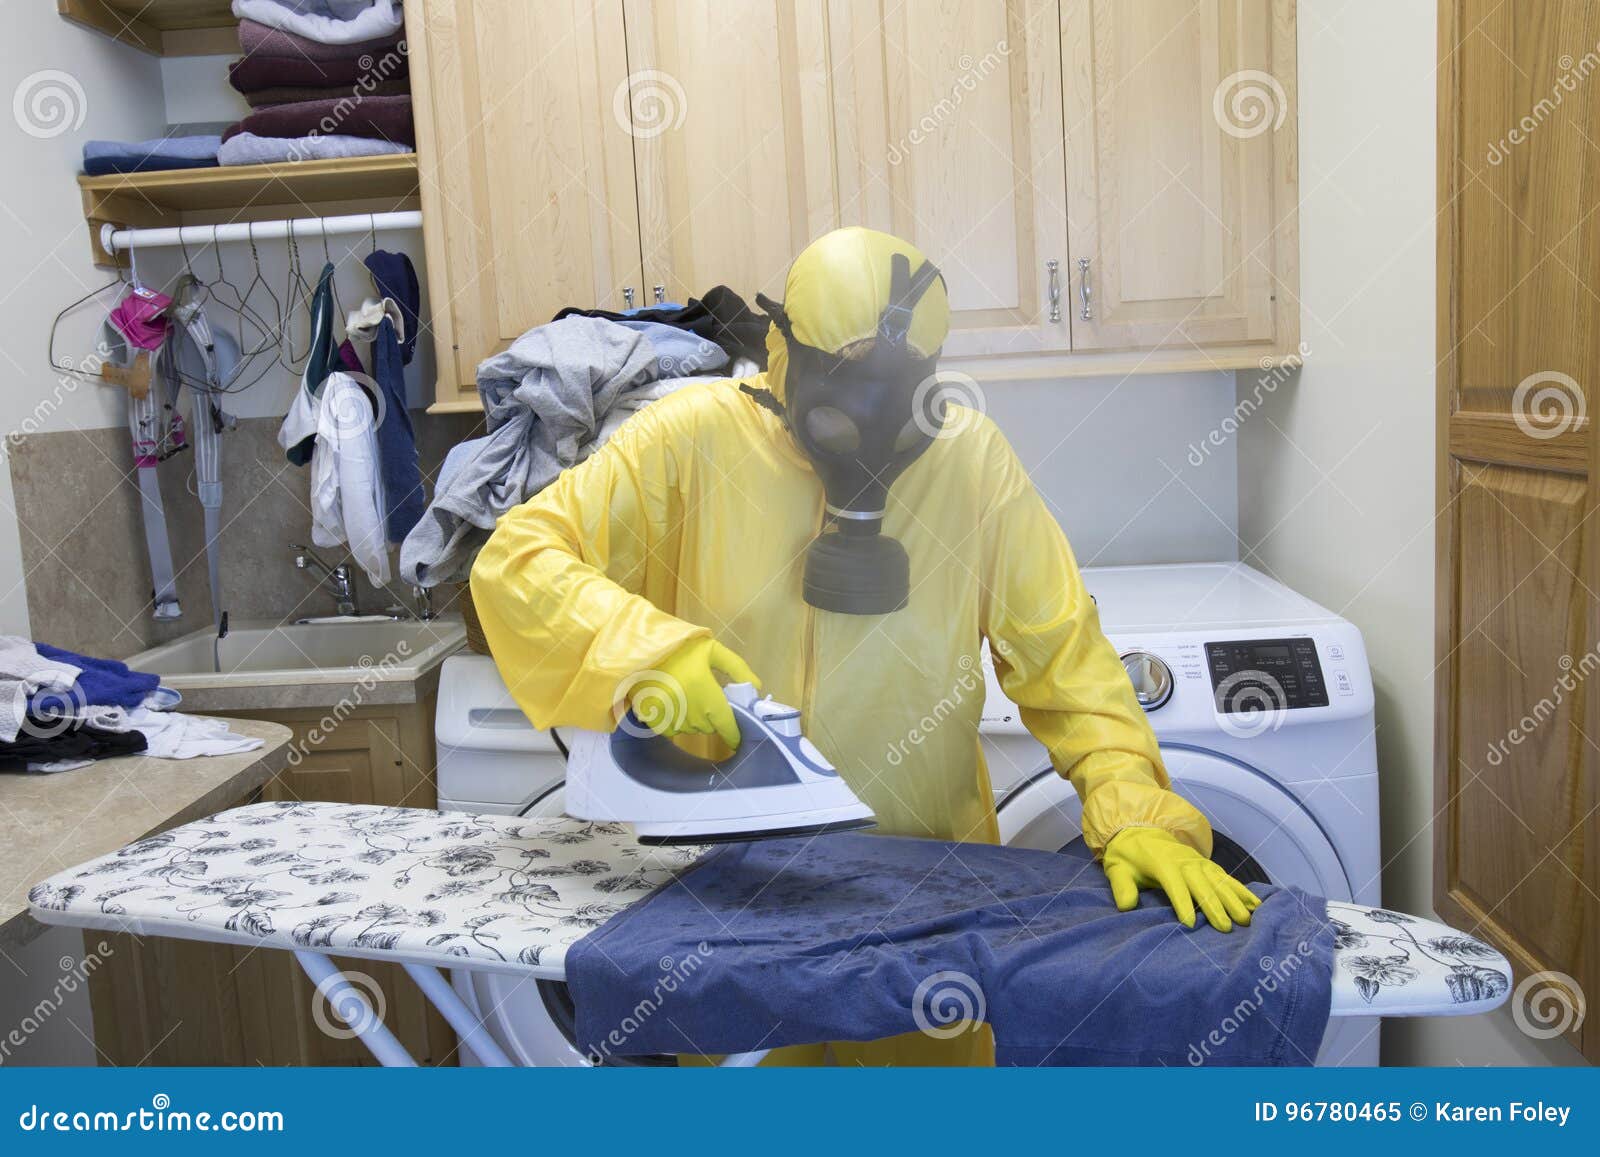 mature woman in haz mat suit ironing shirt on board with steam